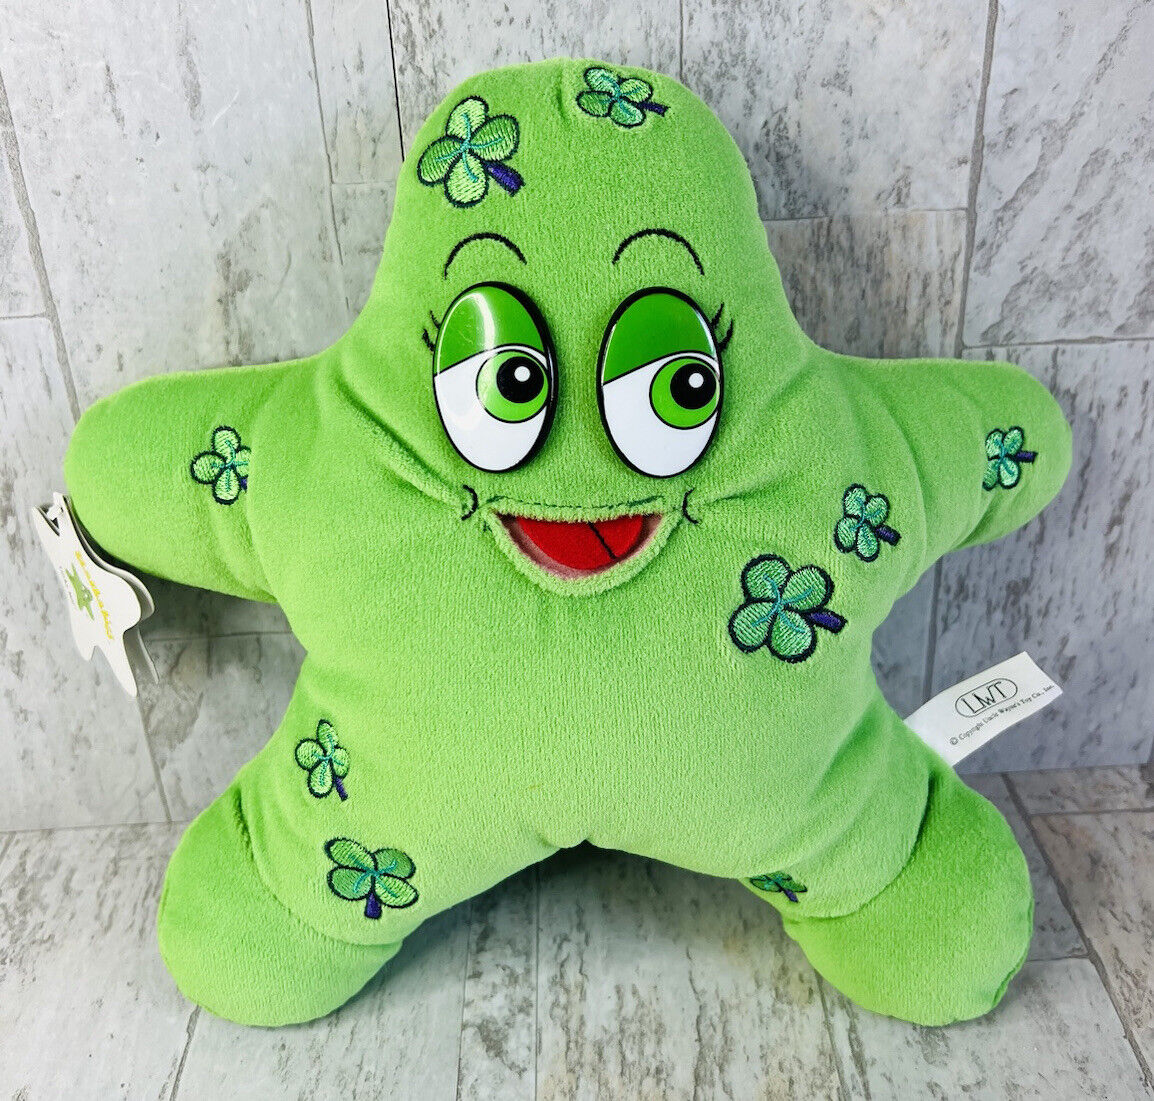 A green star plush with emrboidered four leaf clovers, hard plastic eyes, and an open mouth with a felt tongue. He also has a star shaped tag